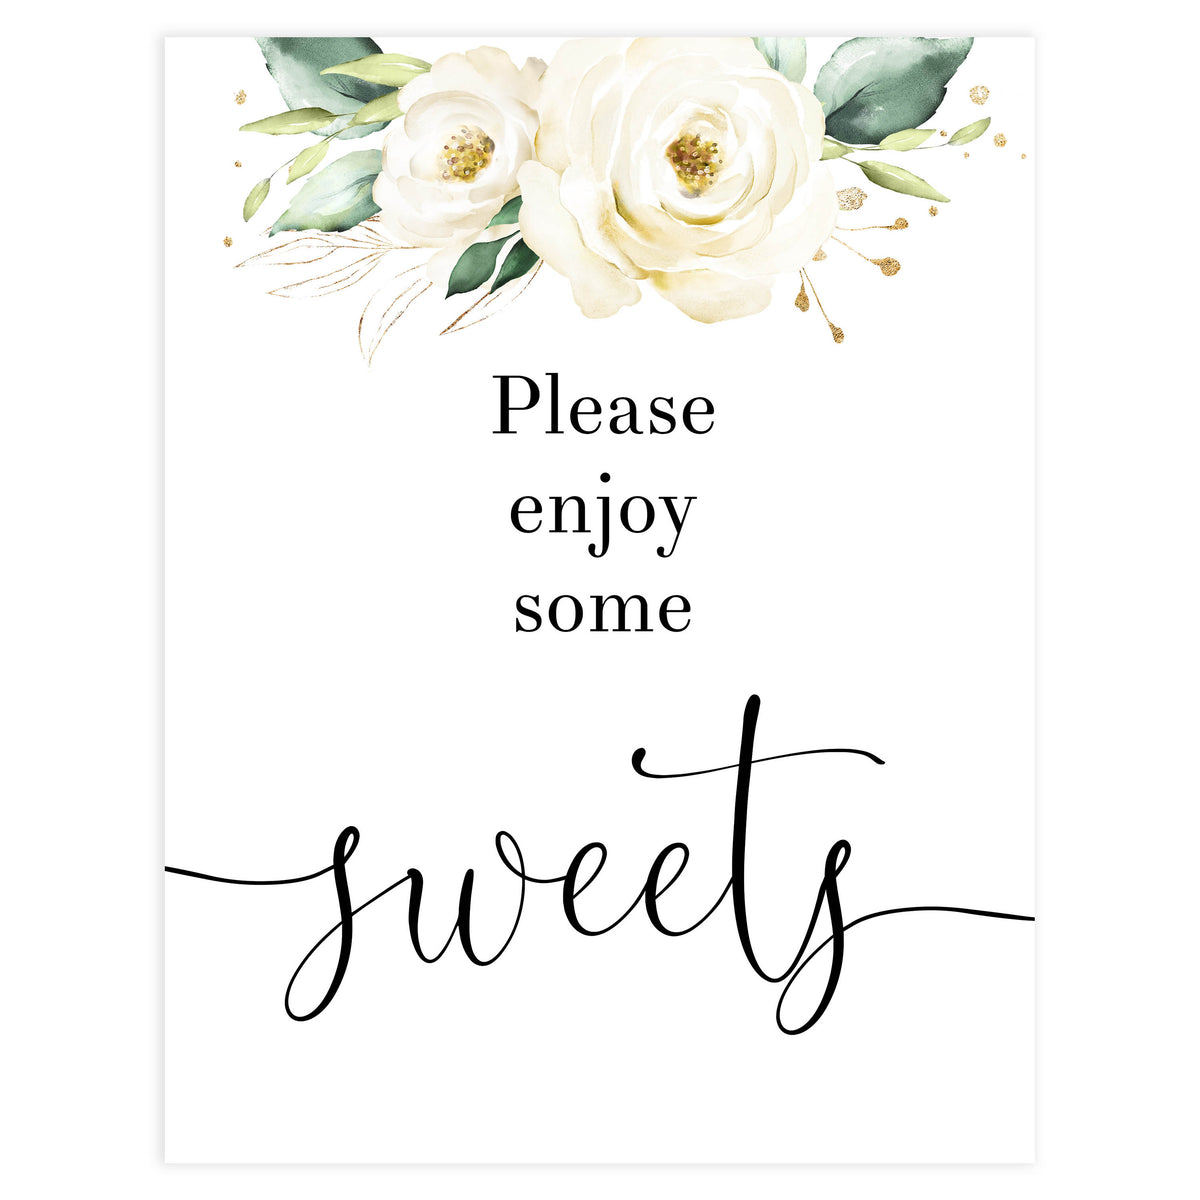 sweets baby shower table signs, White floral baby decor, printable baby table signs, printable baby decor, baby botanical table signs, fun baby signs, baby white floral fun baby table signs